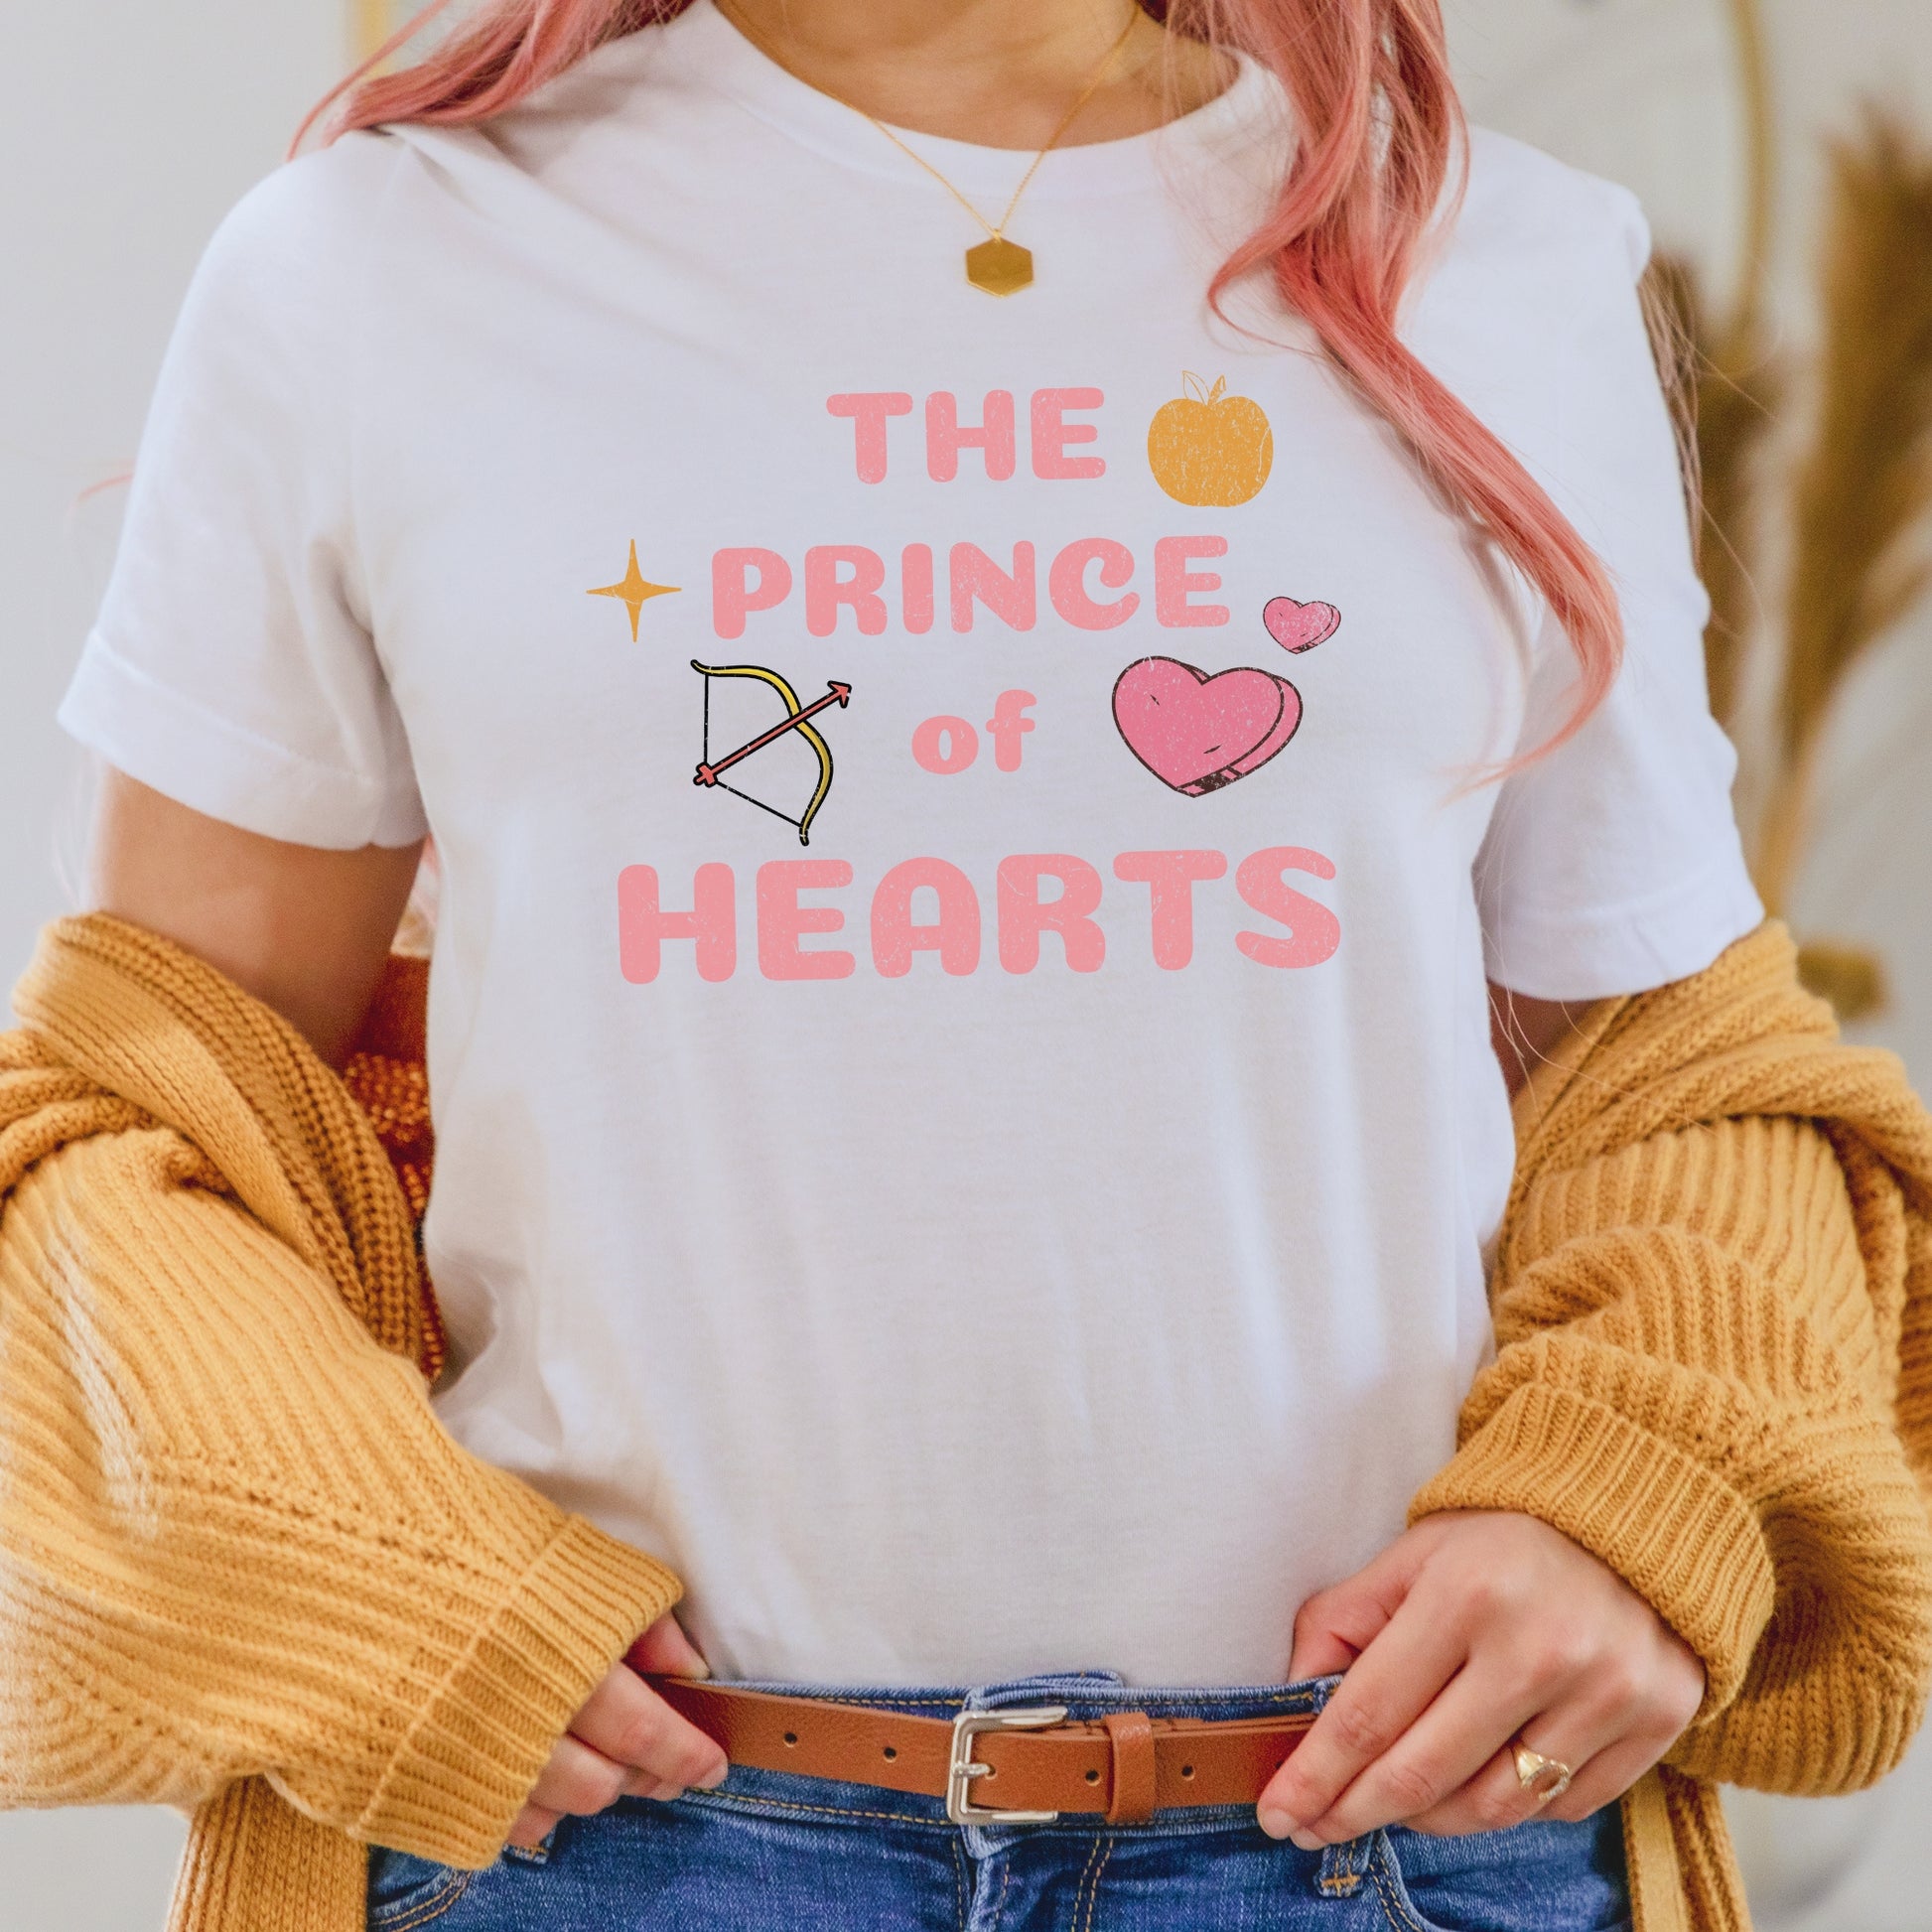 Jacks The Prince of Hearts on a White T- Shirt | Once upon a Broken Heart merch | Ink and Stories bookish merch